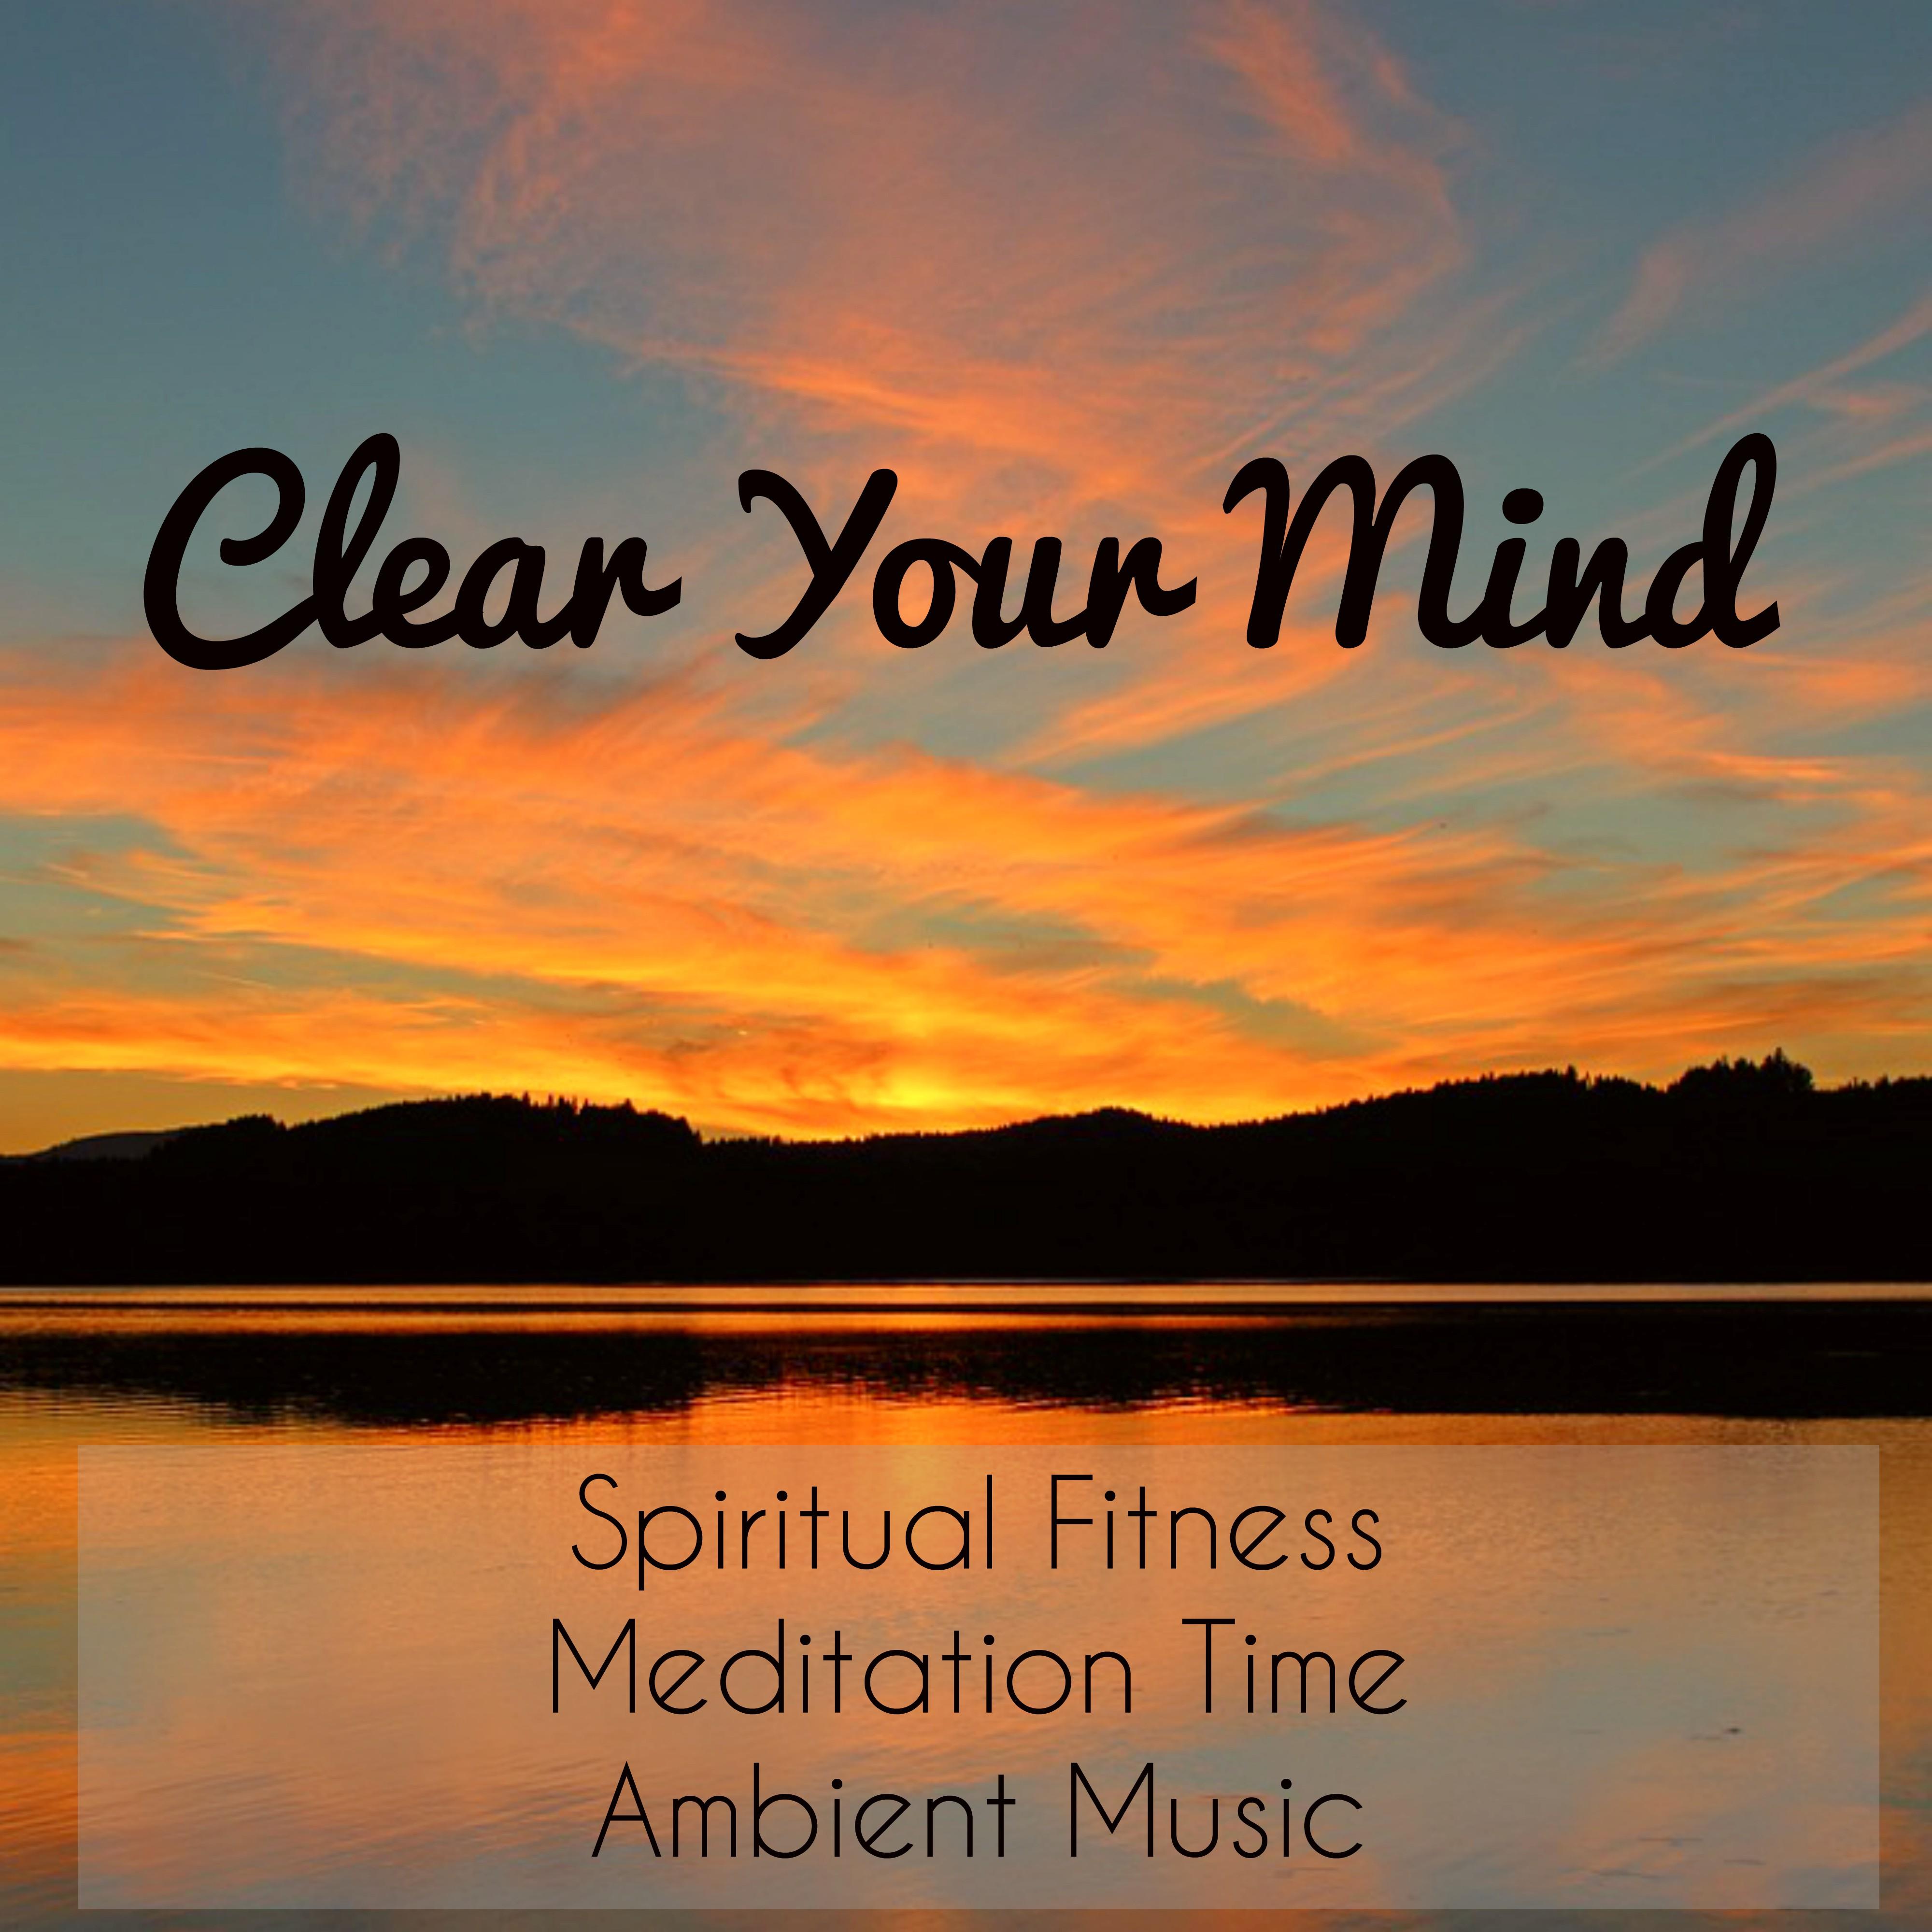 Clear Your Mind - Spiritual Fitness Meditation Time Ambient Music to Reduce Anxiety and Deep Relaxation with Nature Instrumental Sounds